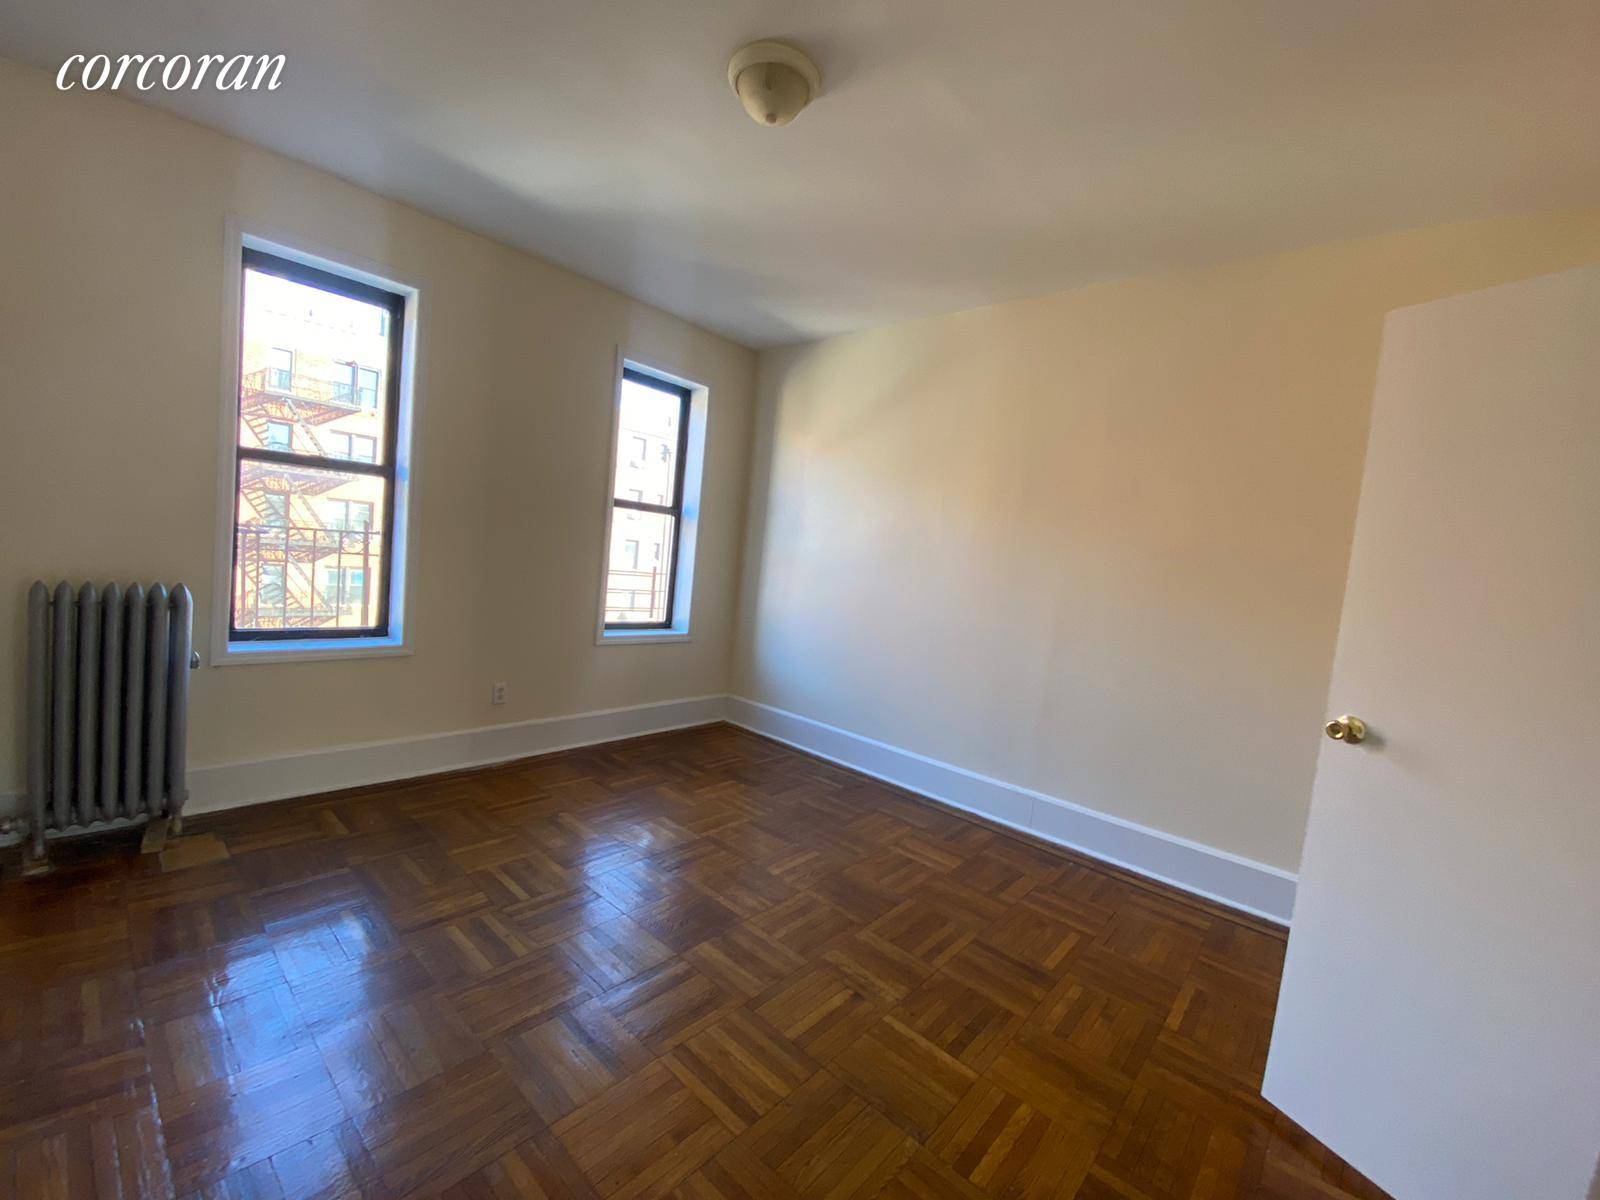 666 OCEAN AVENUE, 4 D, DITMAS PARK NO FEE Three bedroom apartment for rent in Prospect Park South.